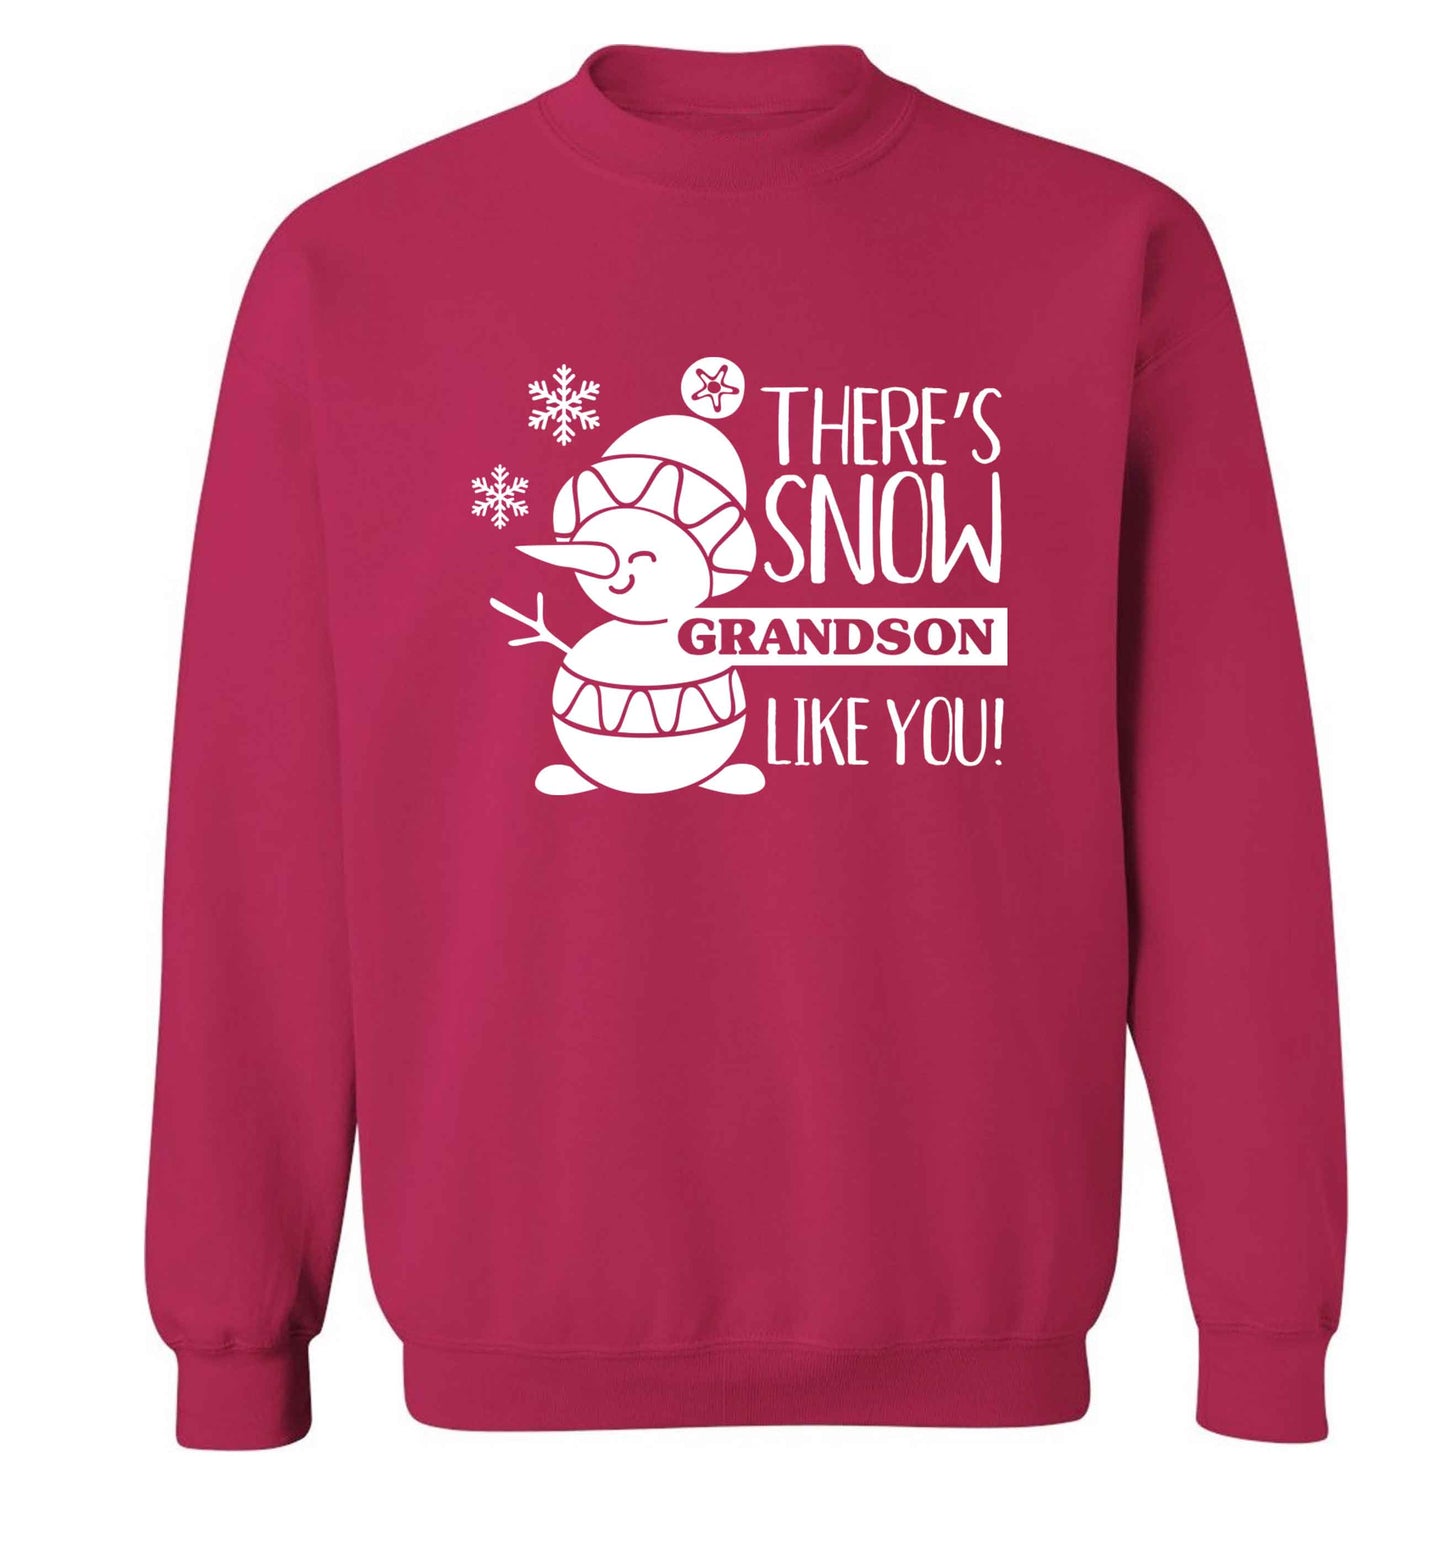 There's snow grandson like you adult's unisex pink sweater 2XL